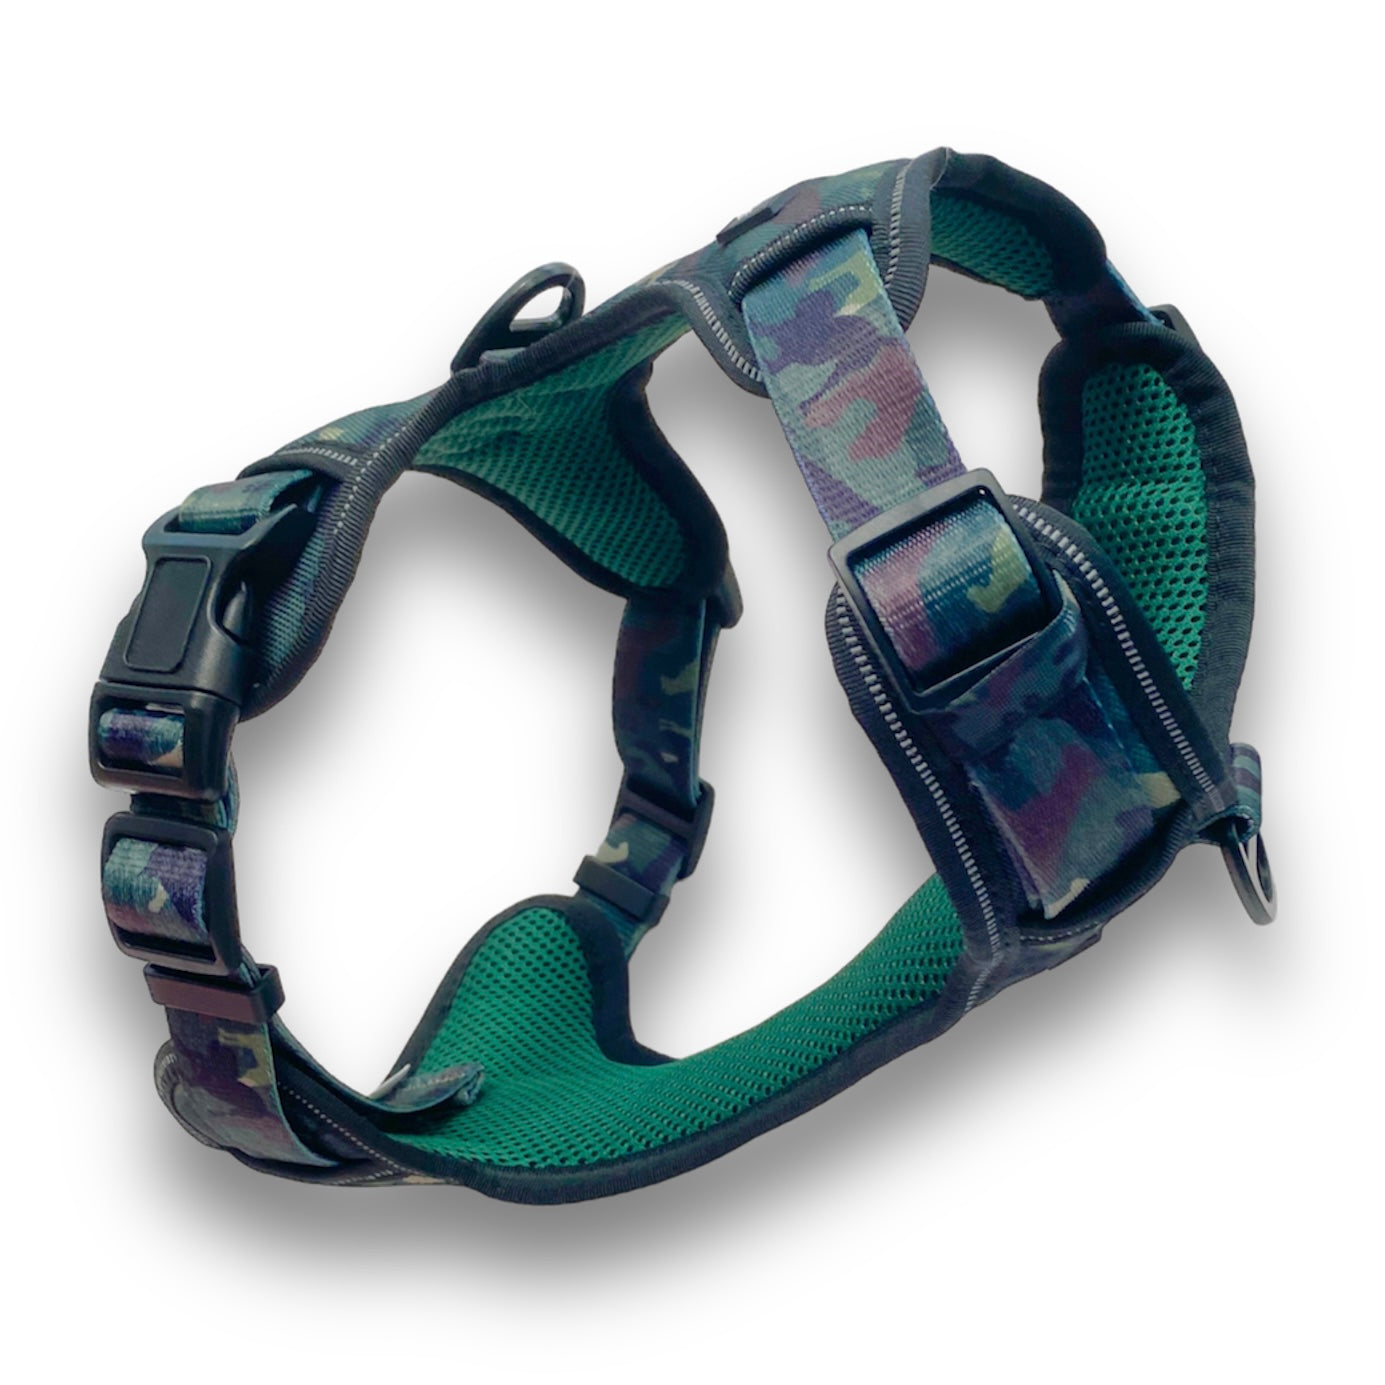 a 3d photo of a green camouflage heavy duty adjustable dog harness by fearless pet